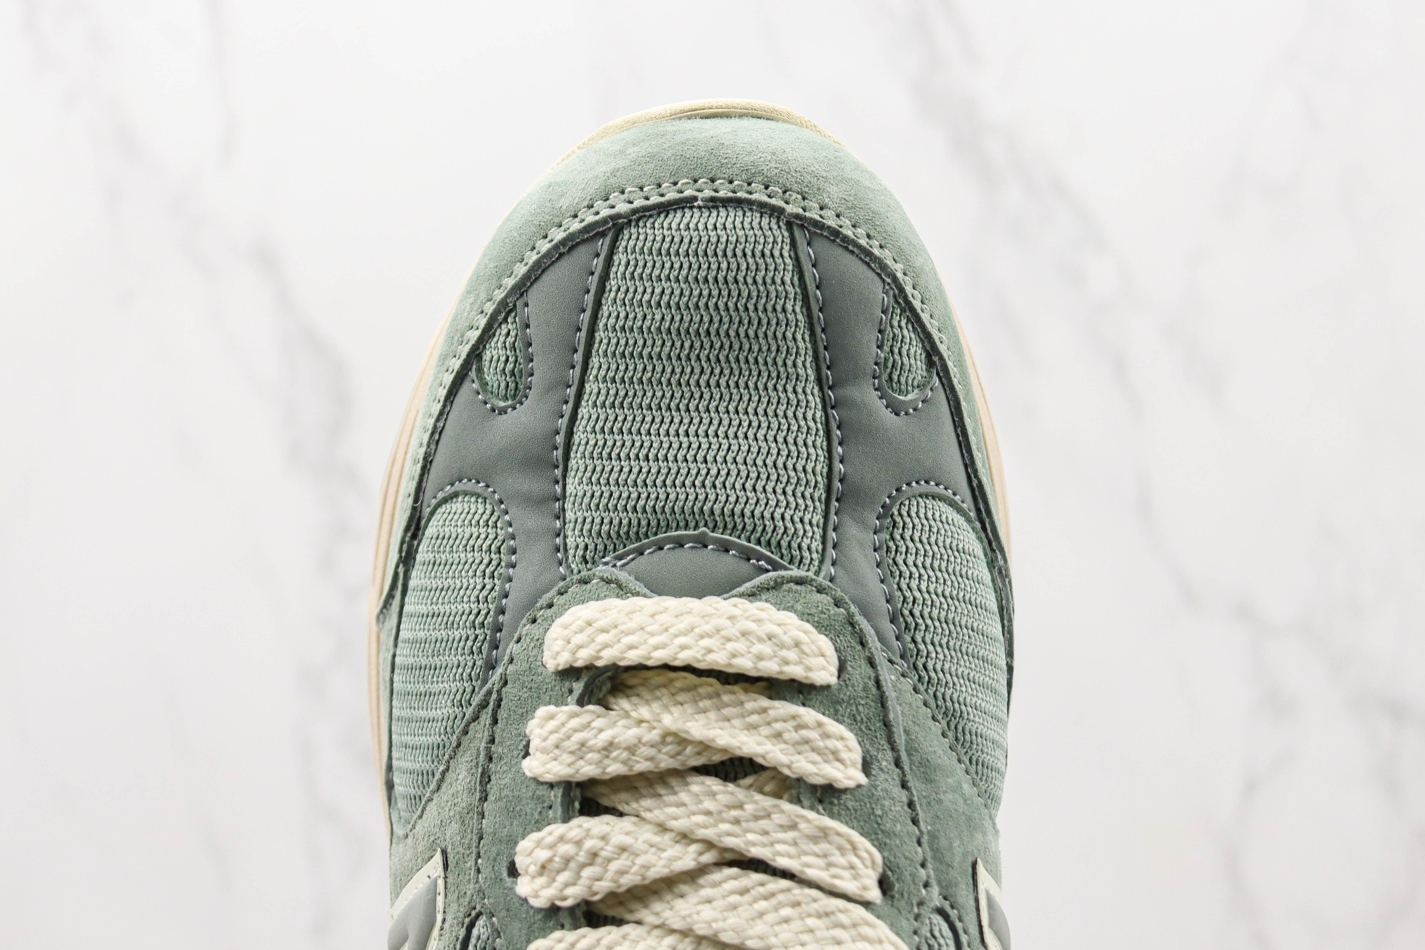 New Balance 993 Made in USA x Kith 'Pistachio' MR993KH1 - Premium Quality Athletic Sneaker